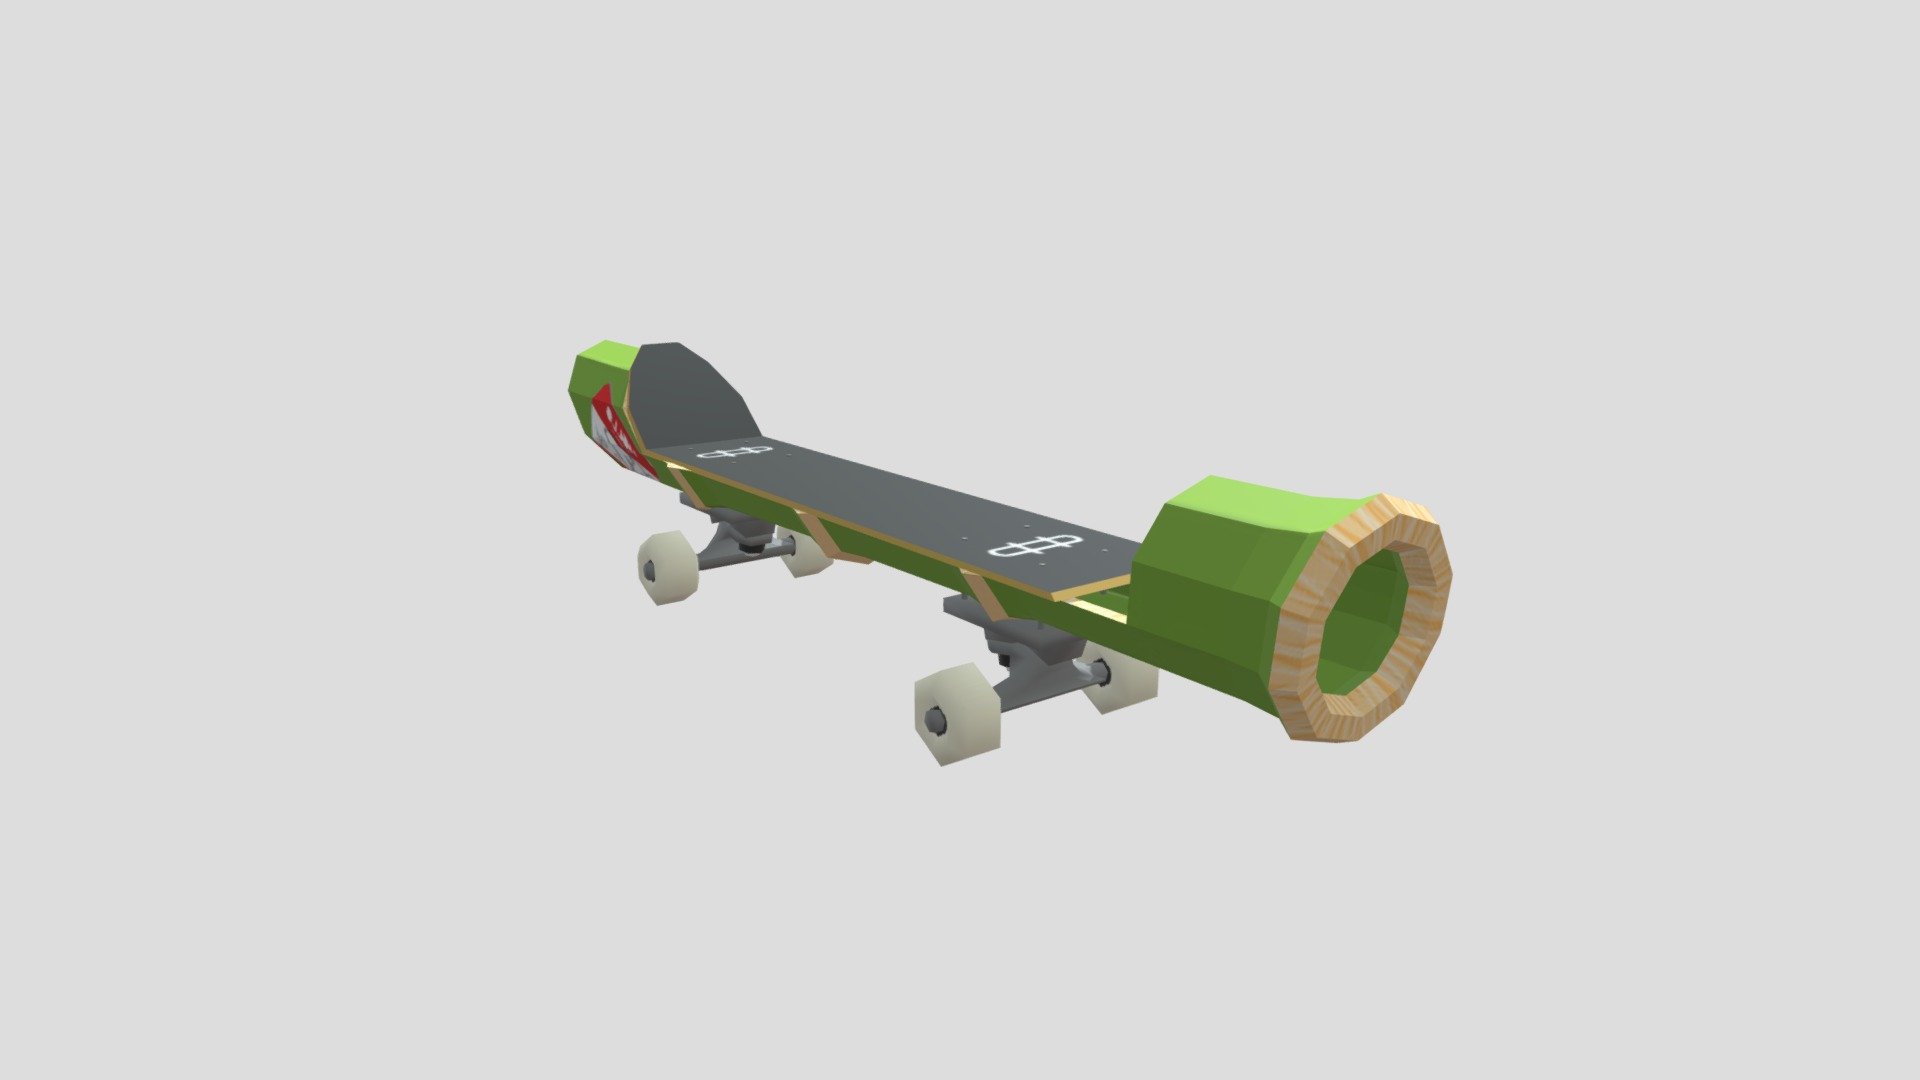 A lowpoly model of a skateboard made of a bamboo shoot i made to mod into Bomb rush cyberfunk.
Model and texture made by myself.

Mod link: https://gamebanana.com/mods/467630 - Bamboo Skatboard - 3D model by bitsofcardboard 3d model